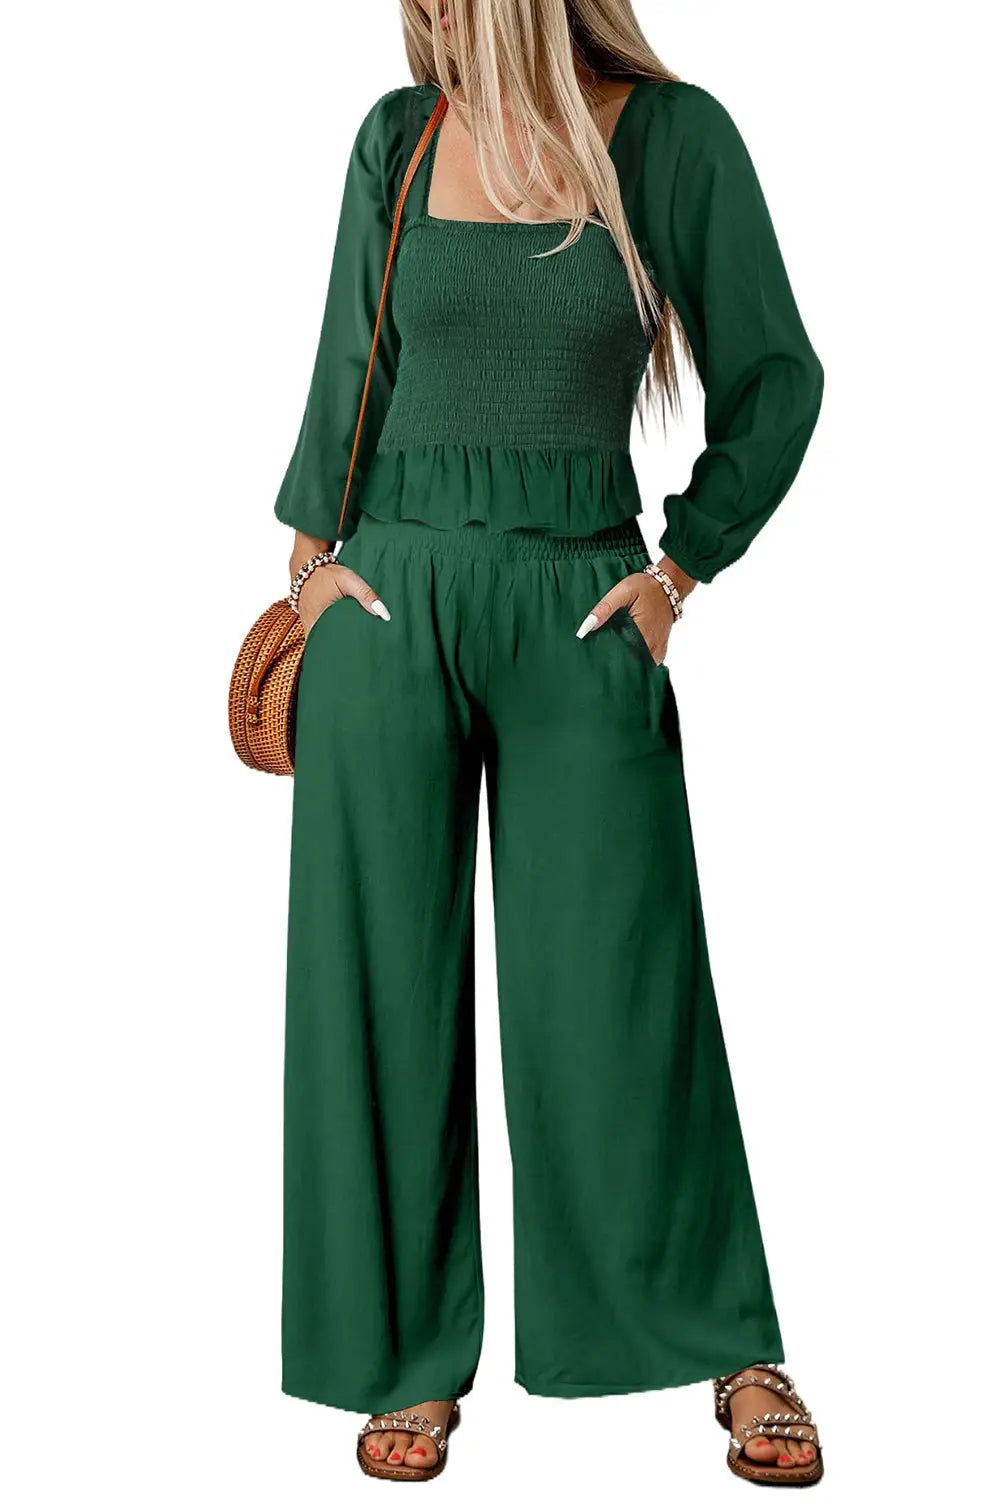 Green square neck smocked peplum top and pants set - sets